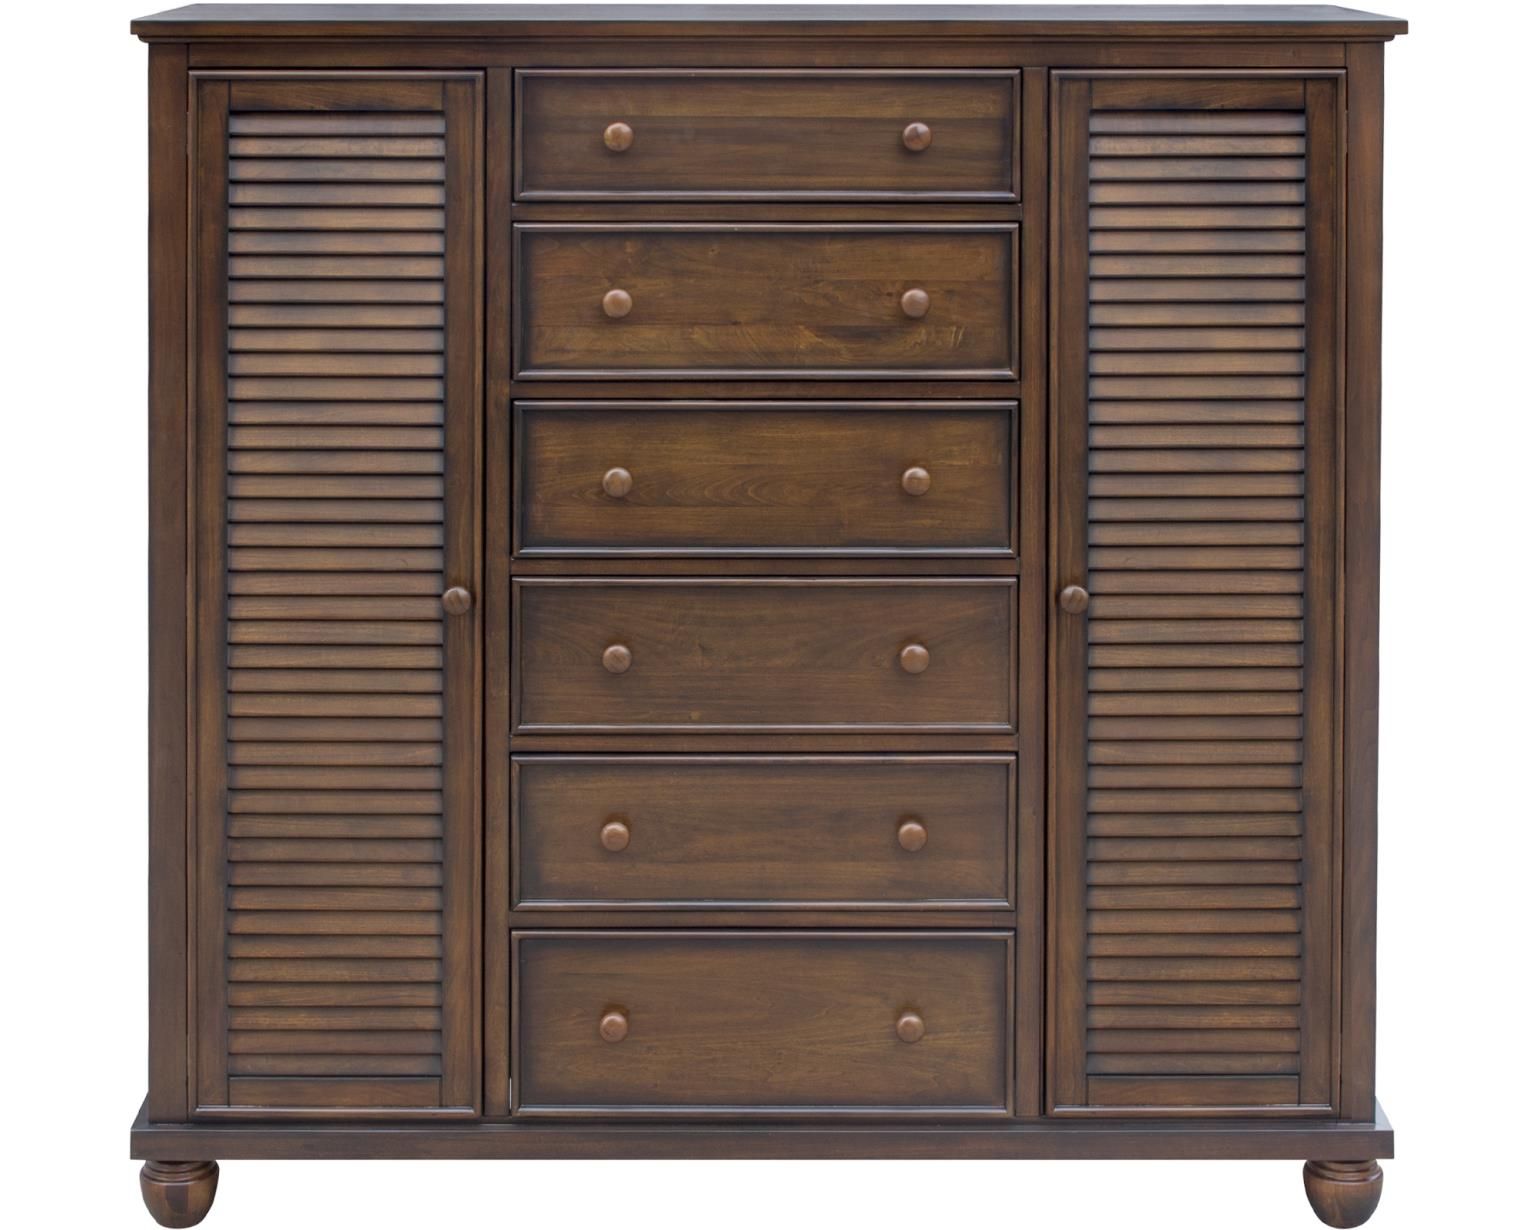 Nantucket Chifferobe in allspice brown, crafted from solid wood, featuring six drawers, two doors, and bun feet.